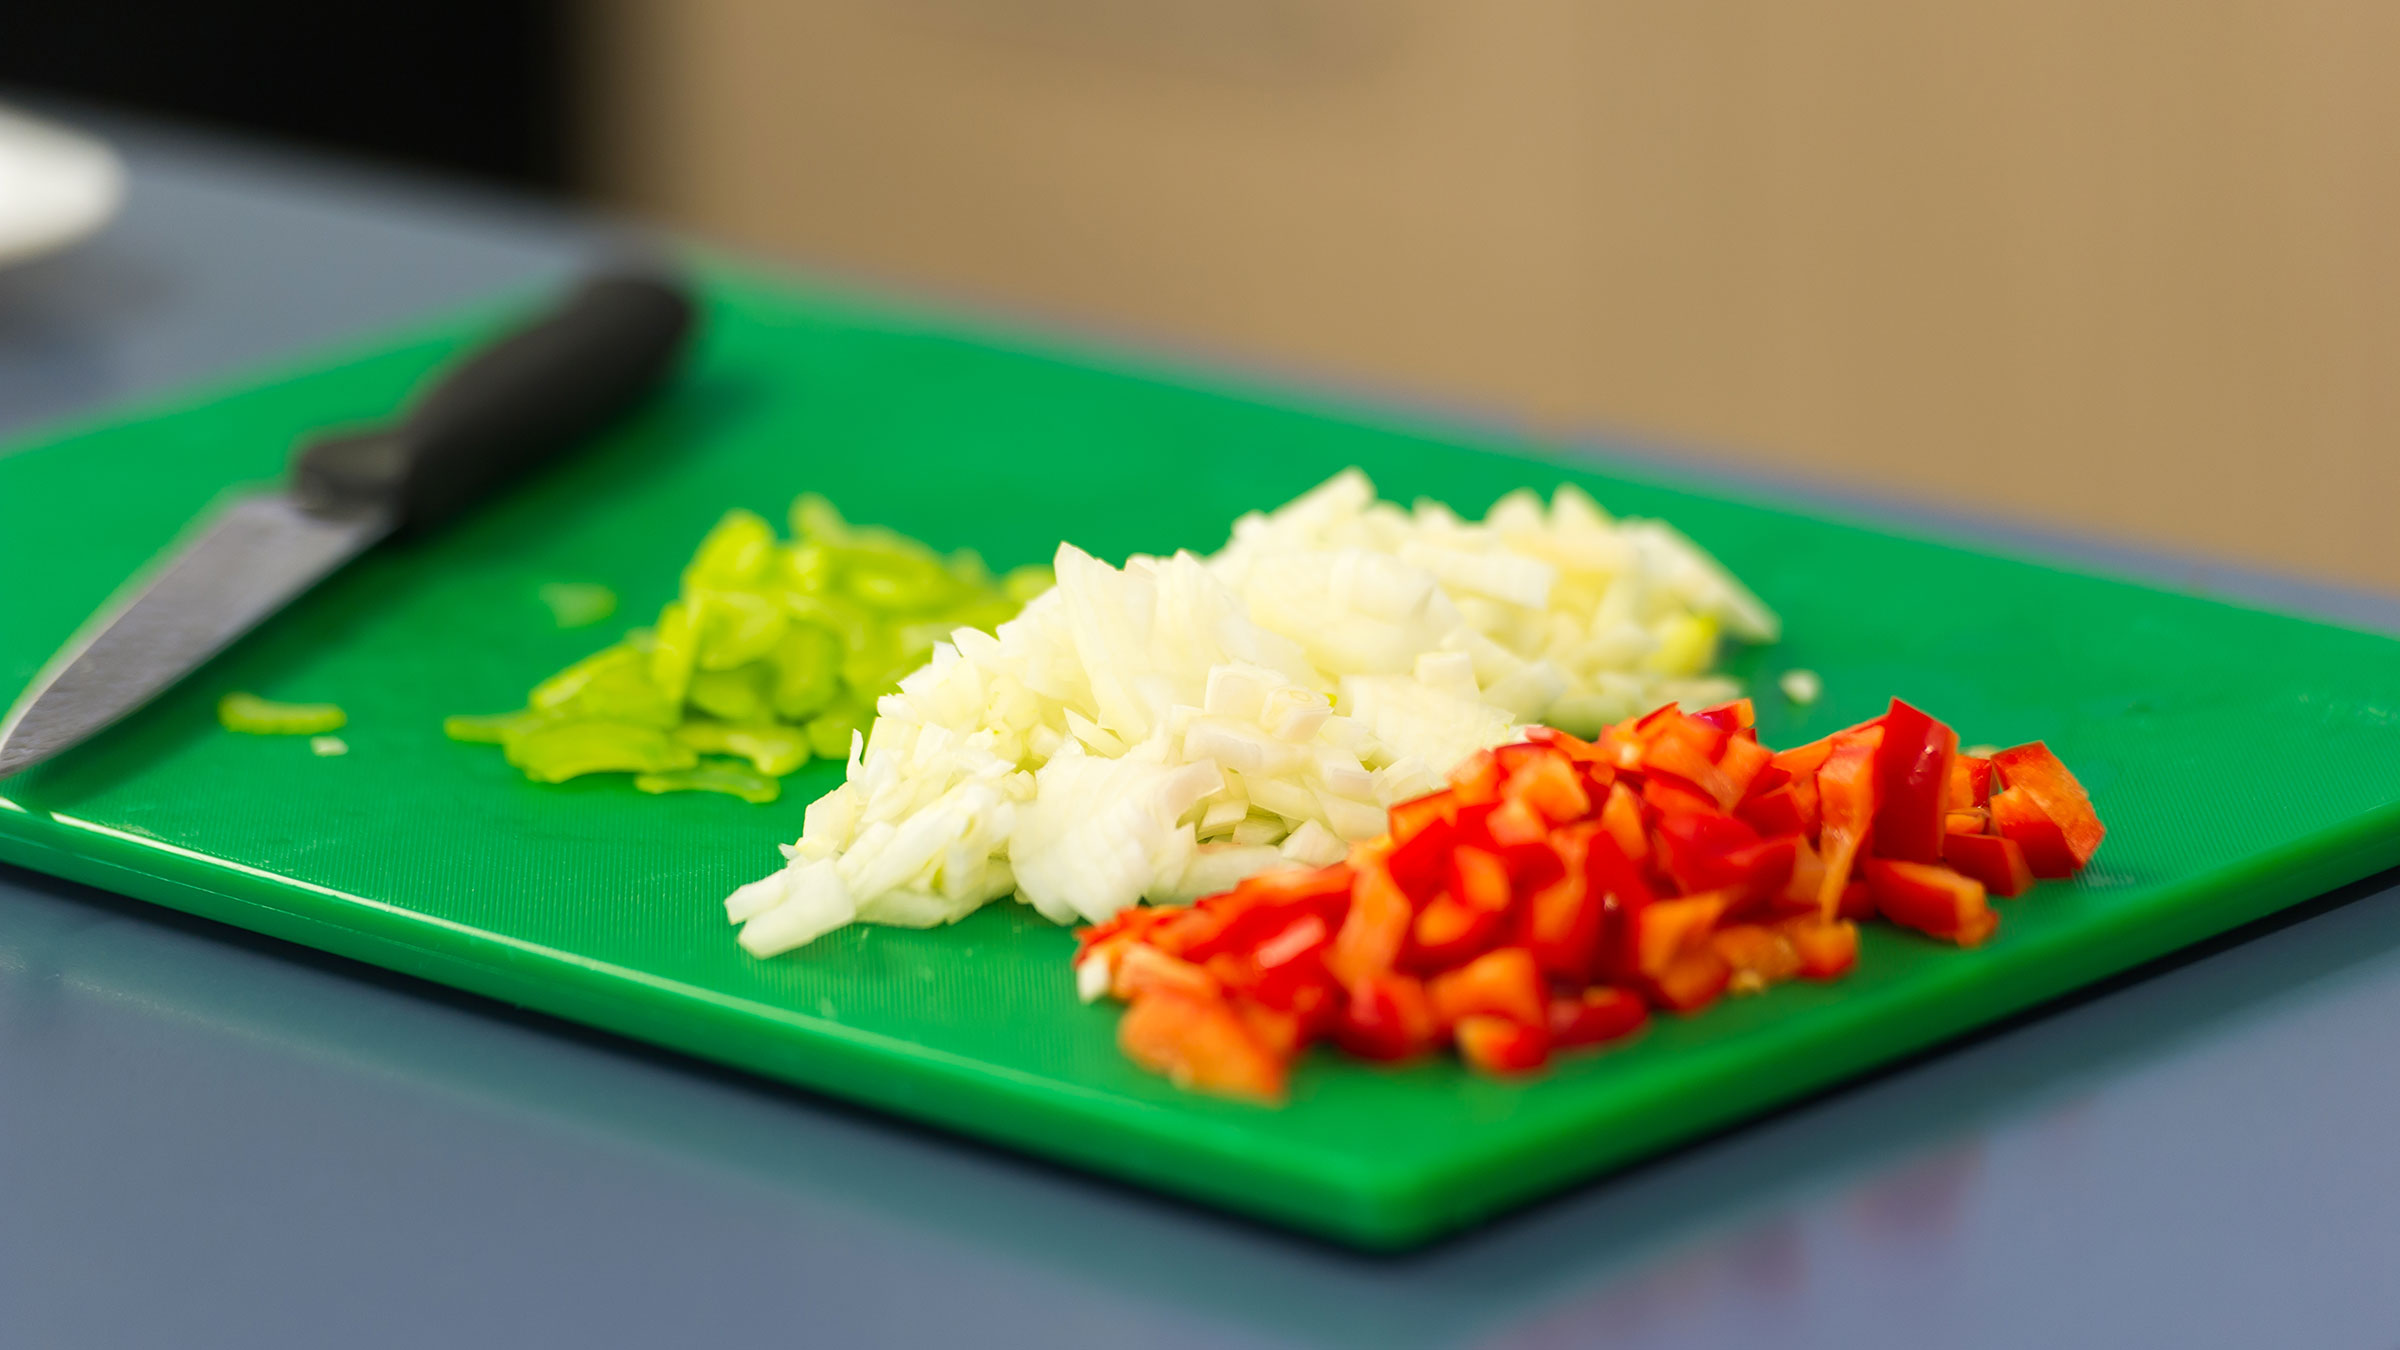 A chopping board with sliced celery, onions and capsicum